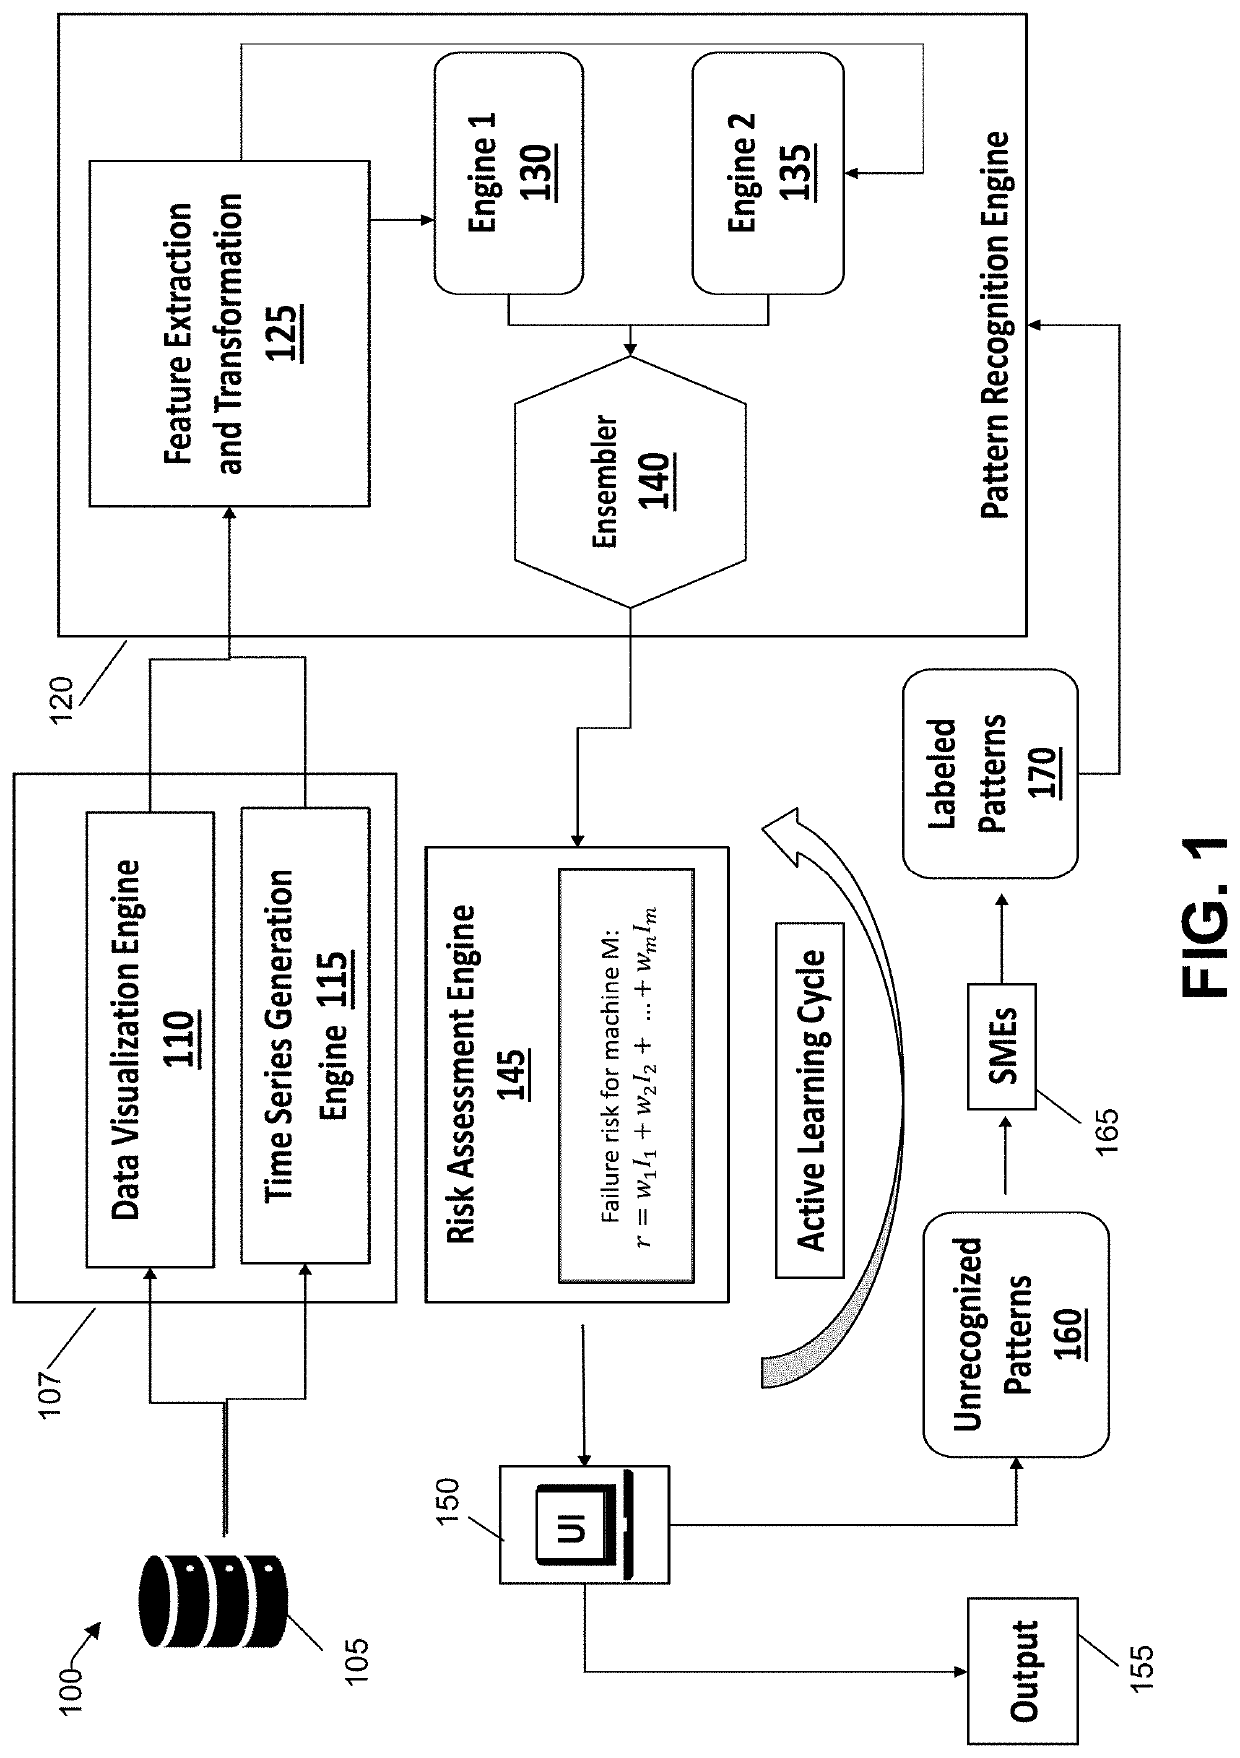 Assessing technical risk in information technology service management using visual pattern recognition